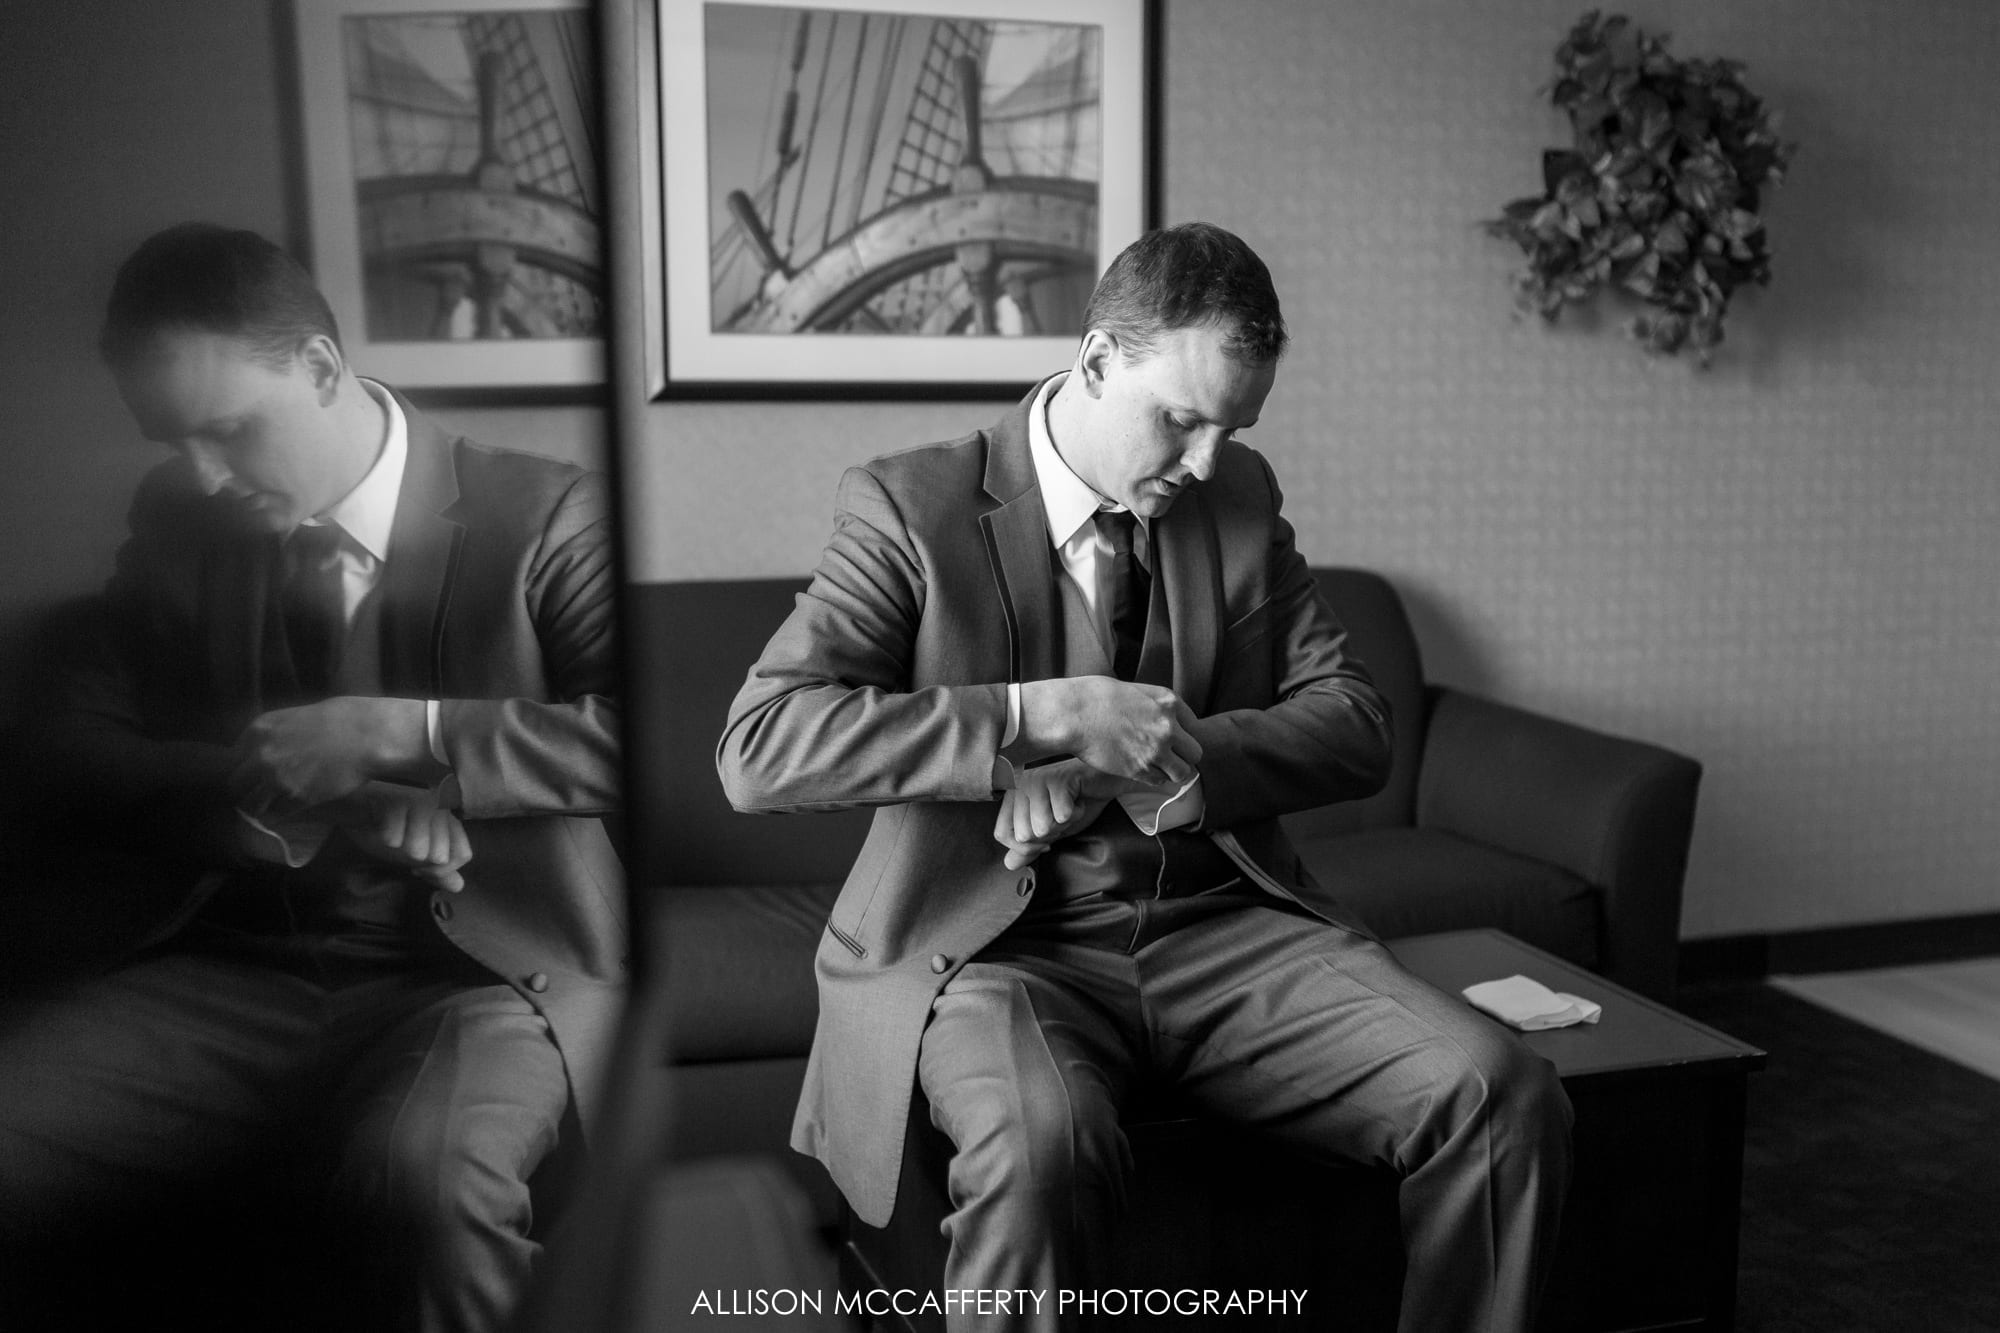 Groom getting ready in hotel room with a reflection